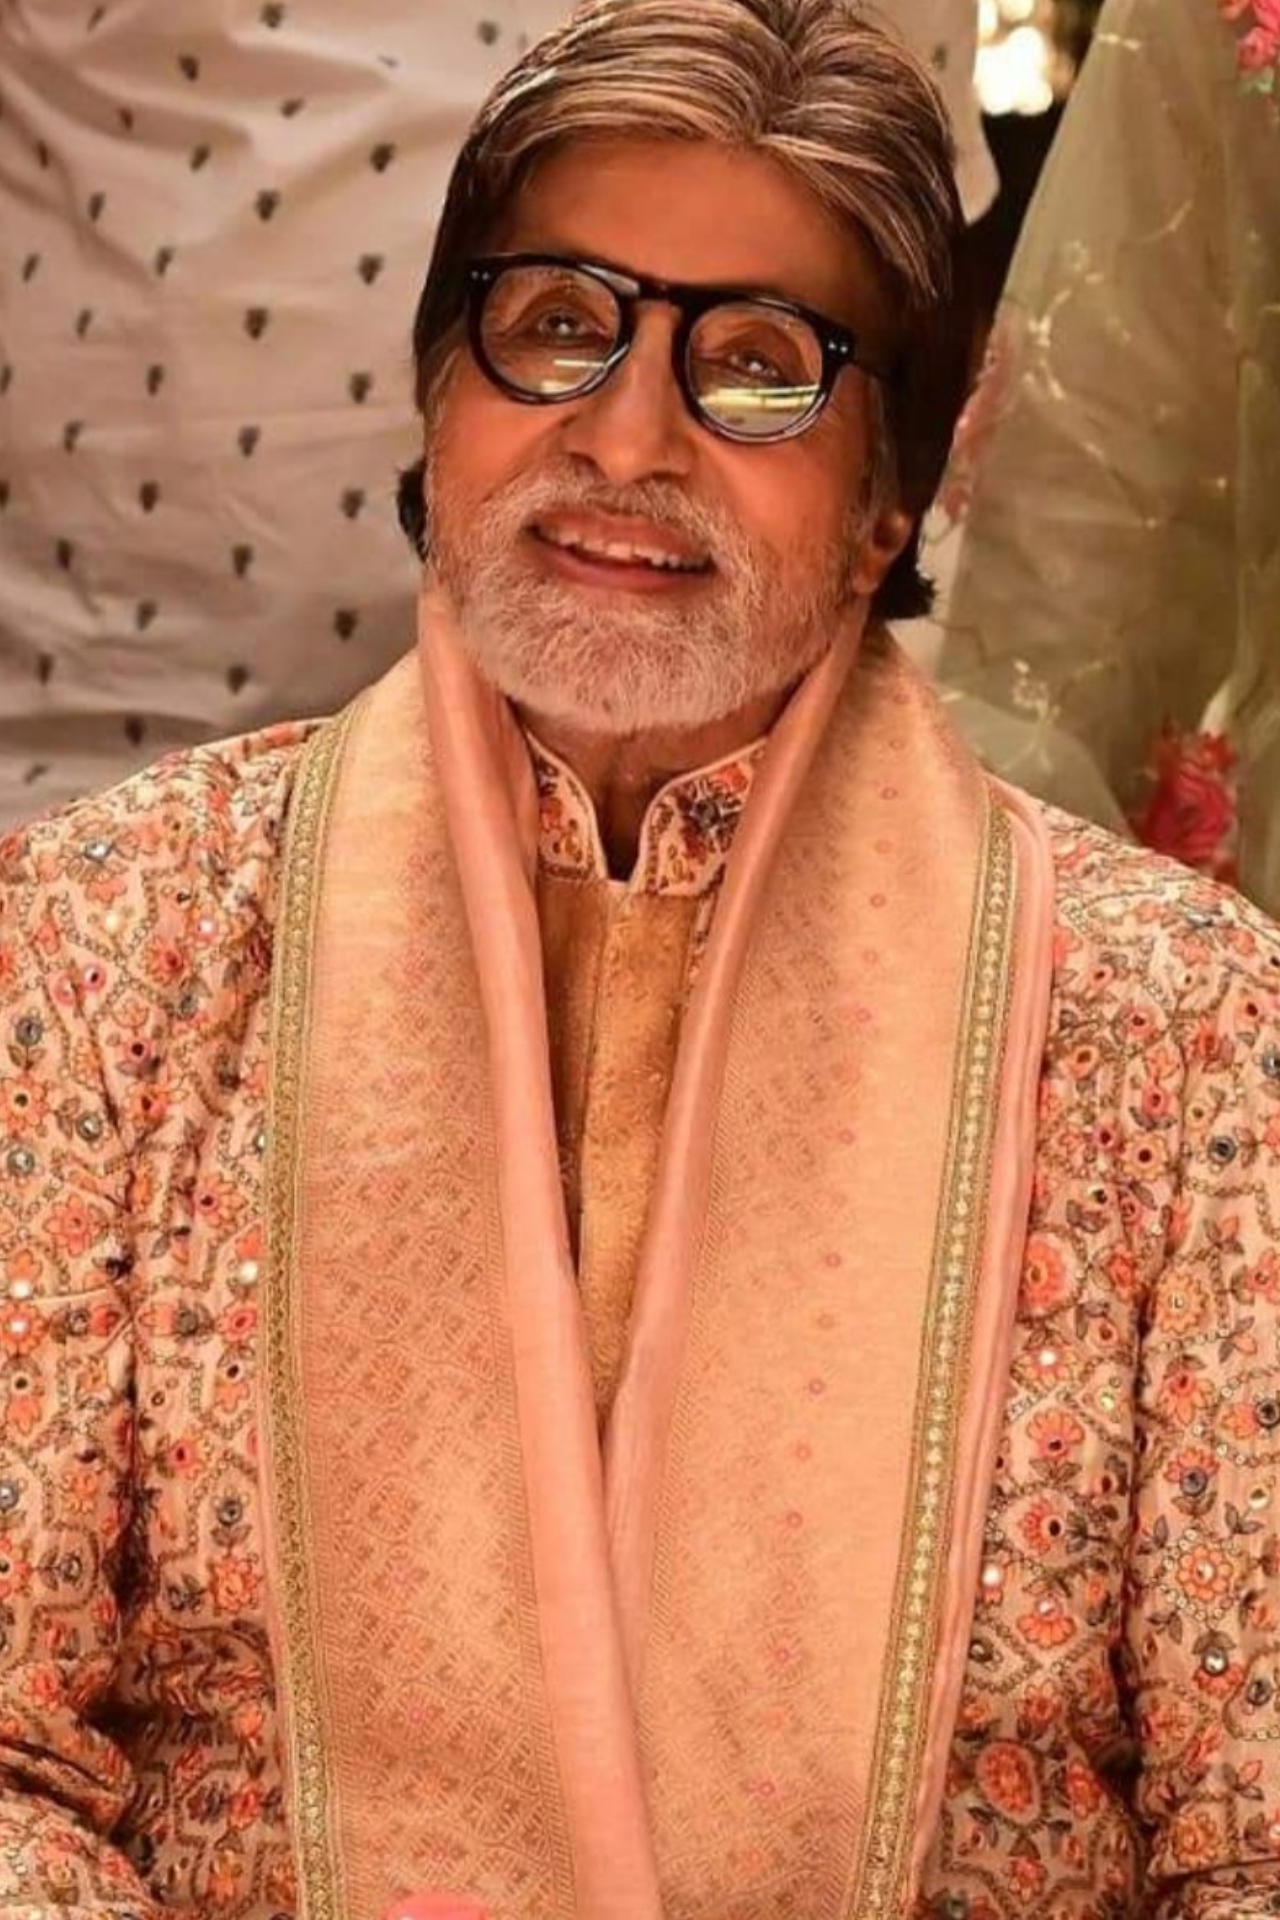 10 most famous dialogues of megastar Amitabh Bachchan.